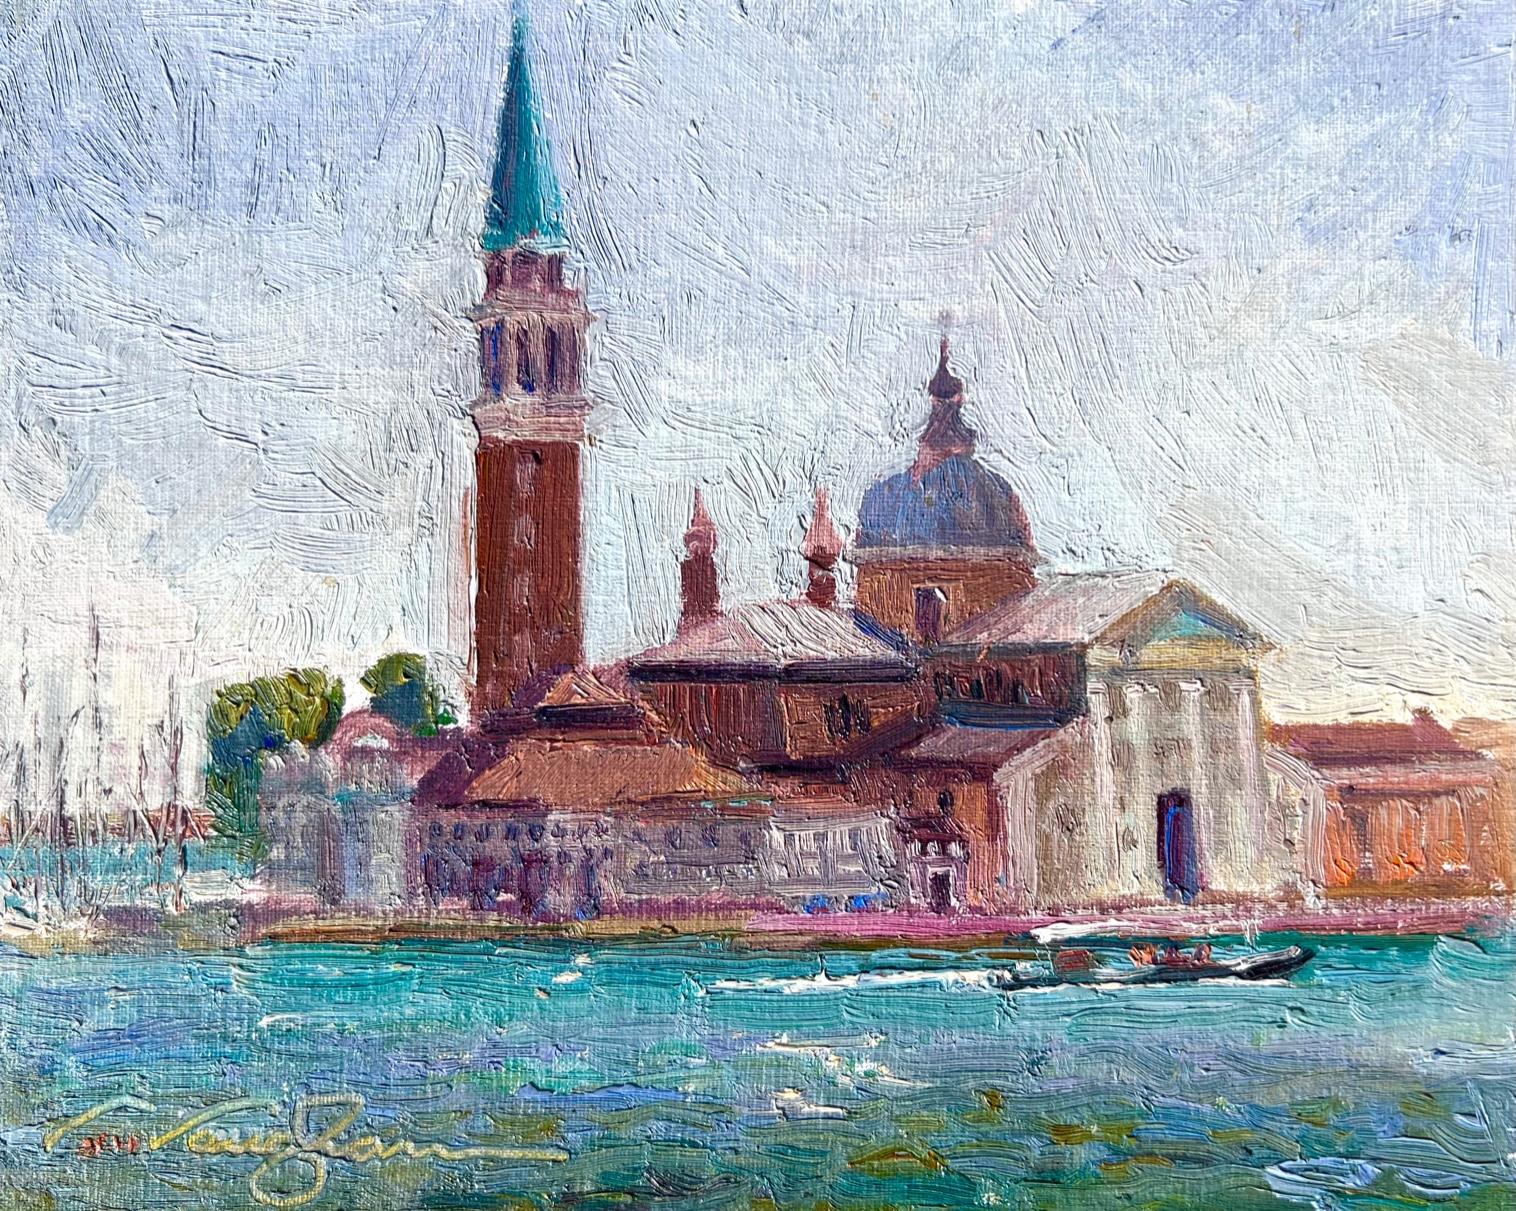 Basilica Santa Croce,  Impressionism , Landscape, Framed, Plein Aire, Italy - Painting by Virginia Vaughan 